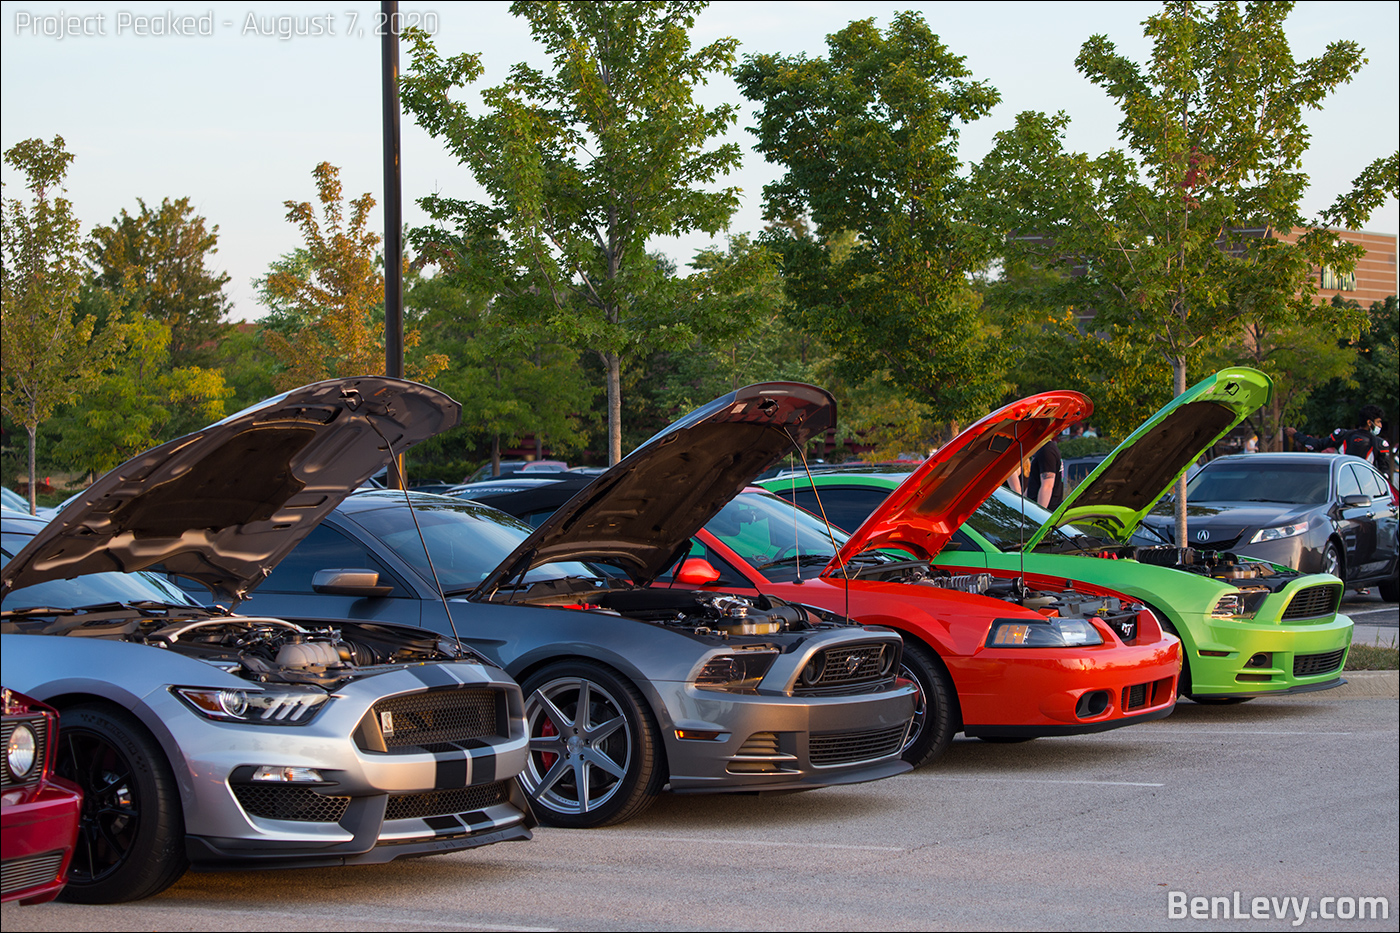 Ford Mustangs with the hoods open